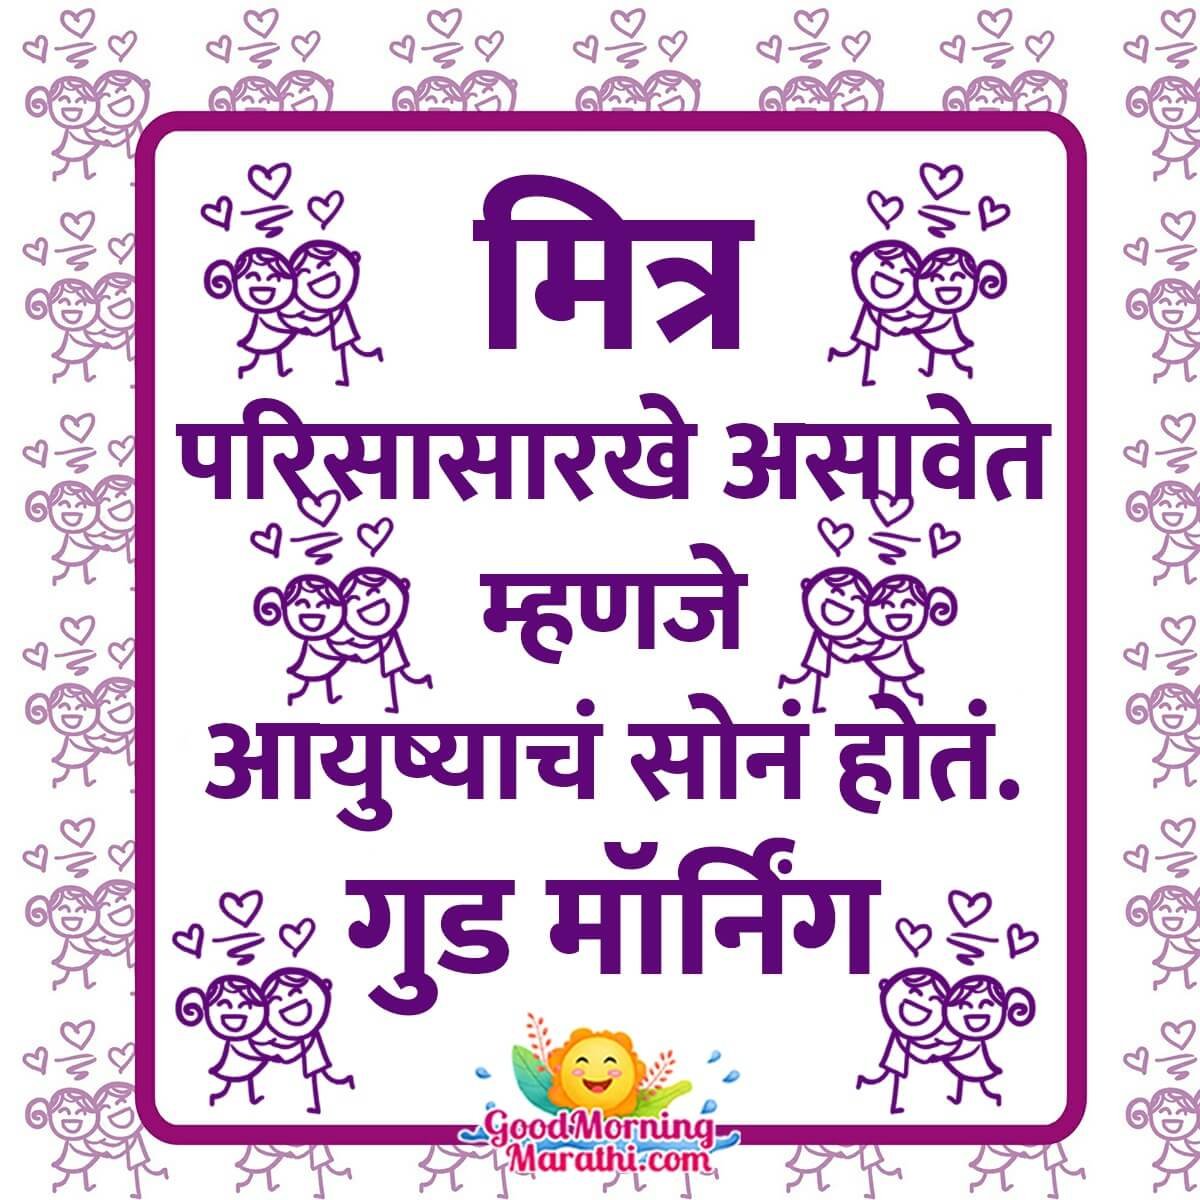 Good Morning Friends Quote In Marathi